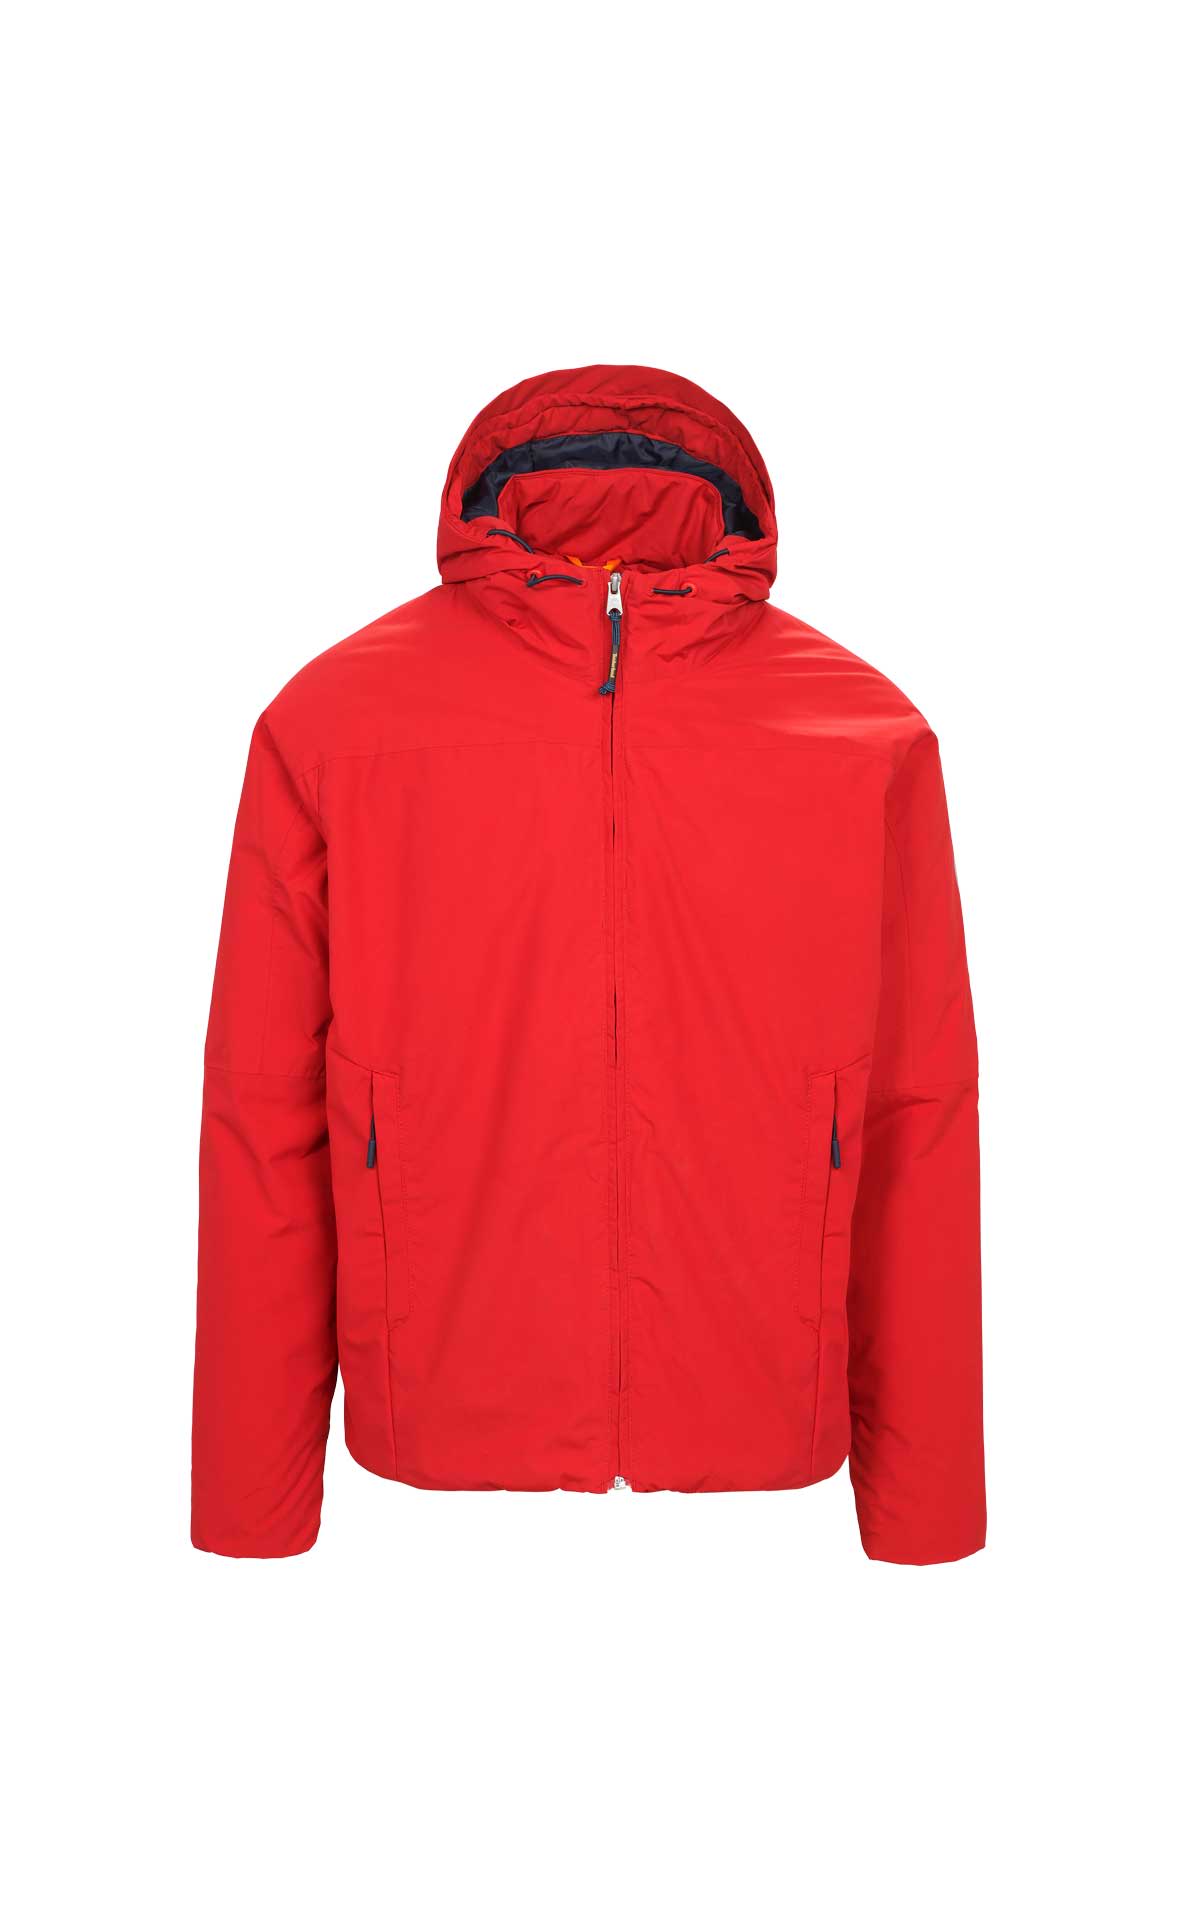 Red parka timberland